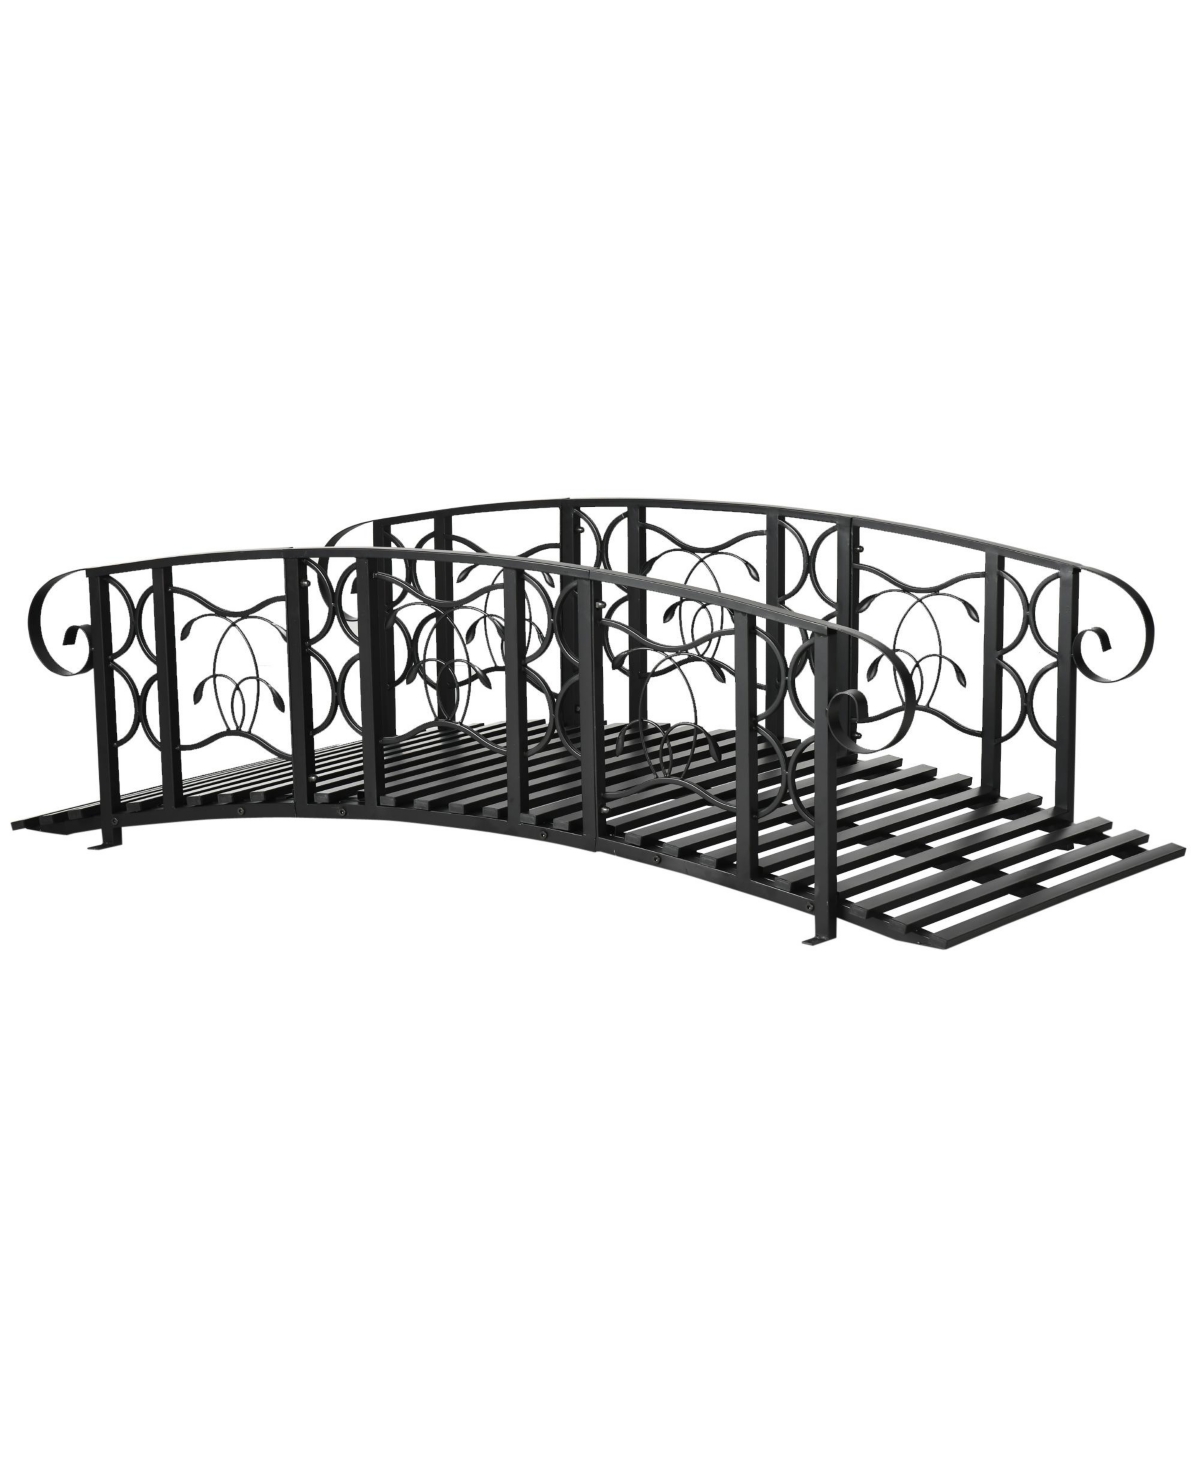 6' Metal Arch Backyard Garden Bridge with 660 lbs. Weight Capacity, Safety Siderails, Vine Motifs, & Easy Assembly for Backyard Creek, Stream